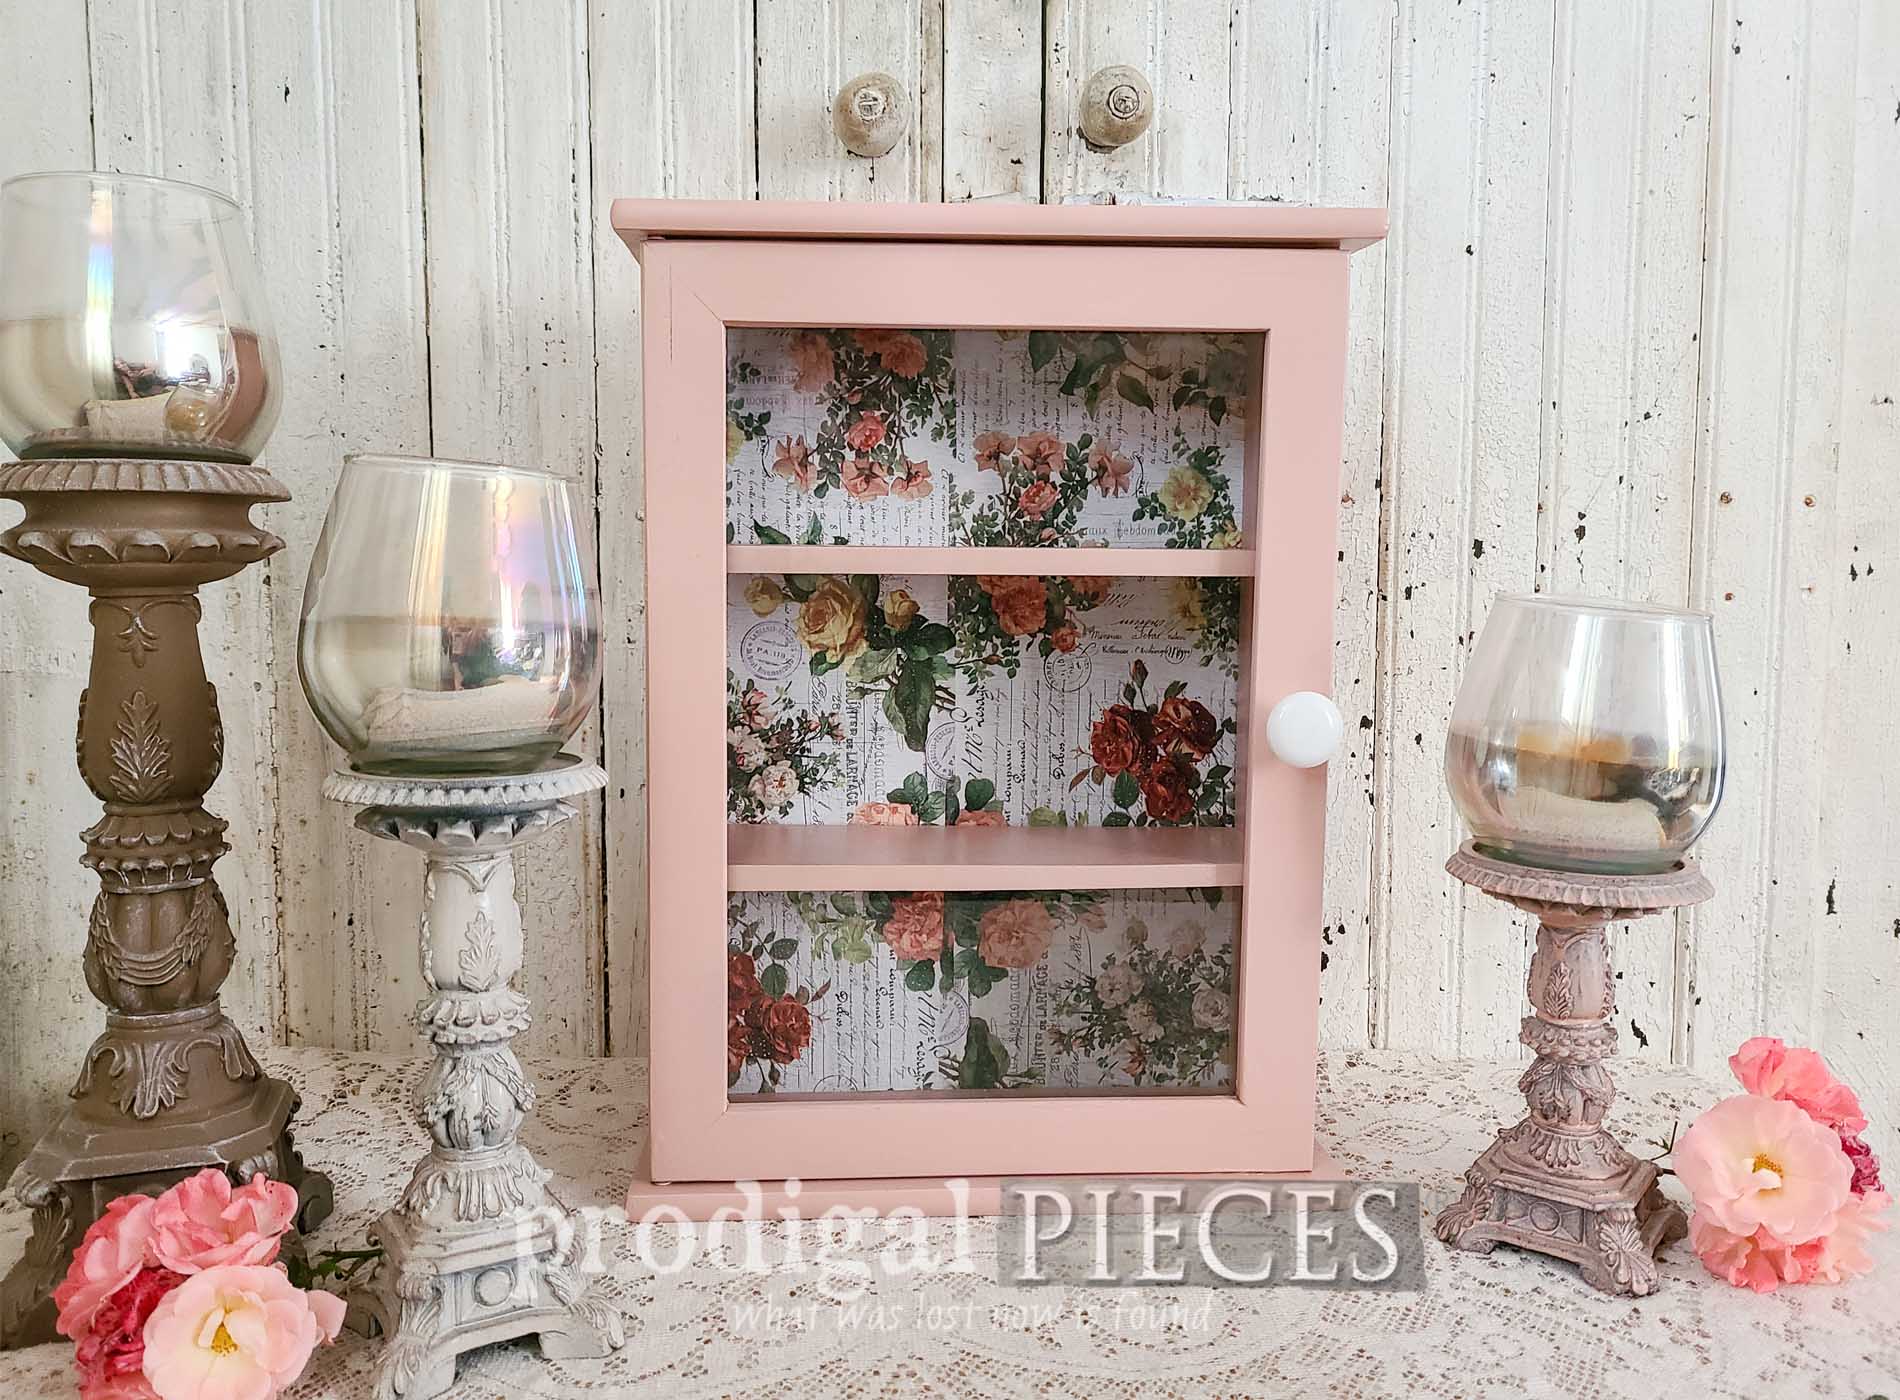 Featured Glass Cabinet Makeover by Larissa of Prodigal Pieces | prodigalpieces.com #prodigalpieces